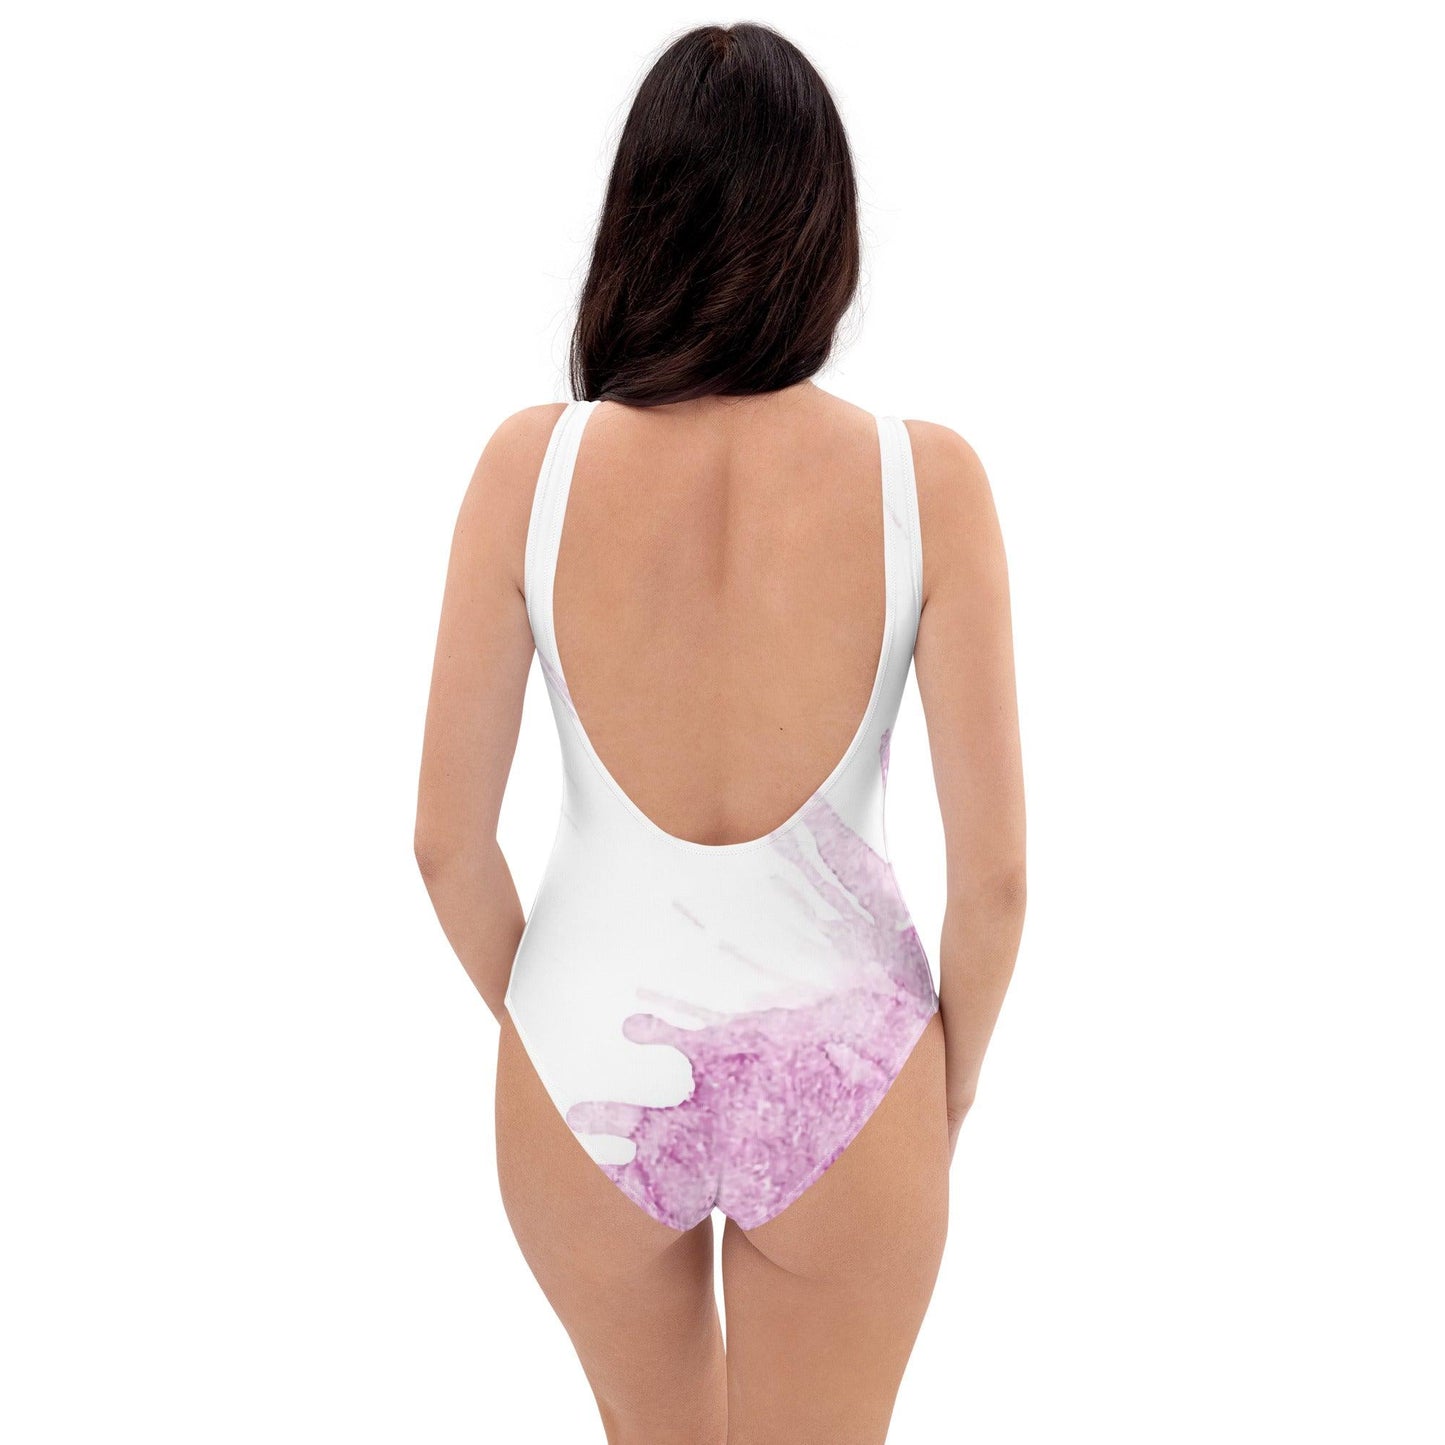 Watercolour Pink Splash - Womens One-Piece Swimsuit - iSAW Company